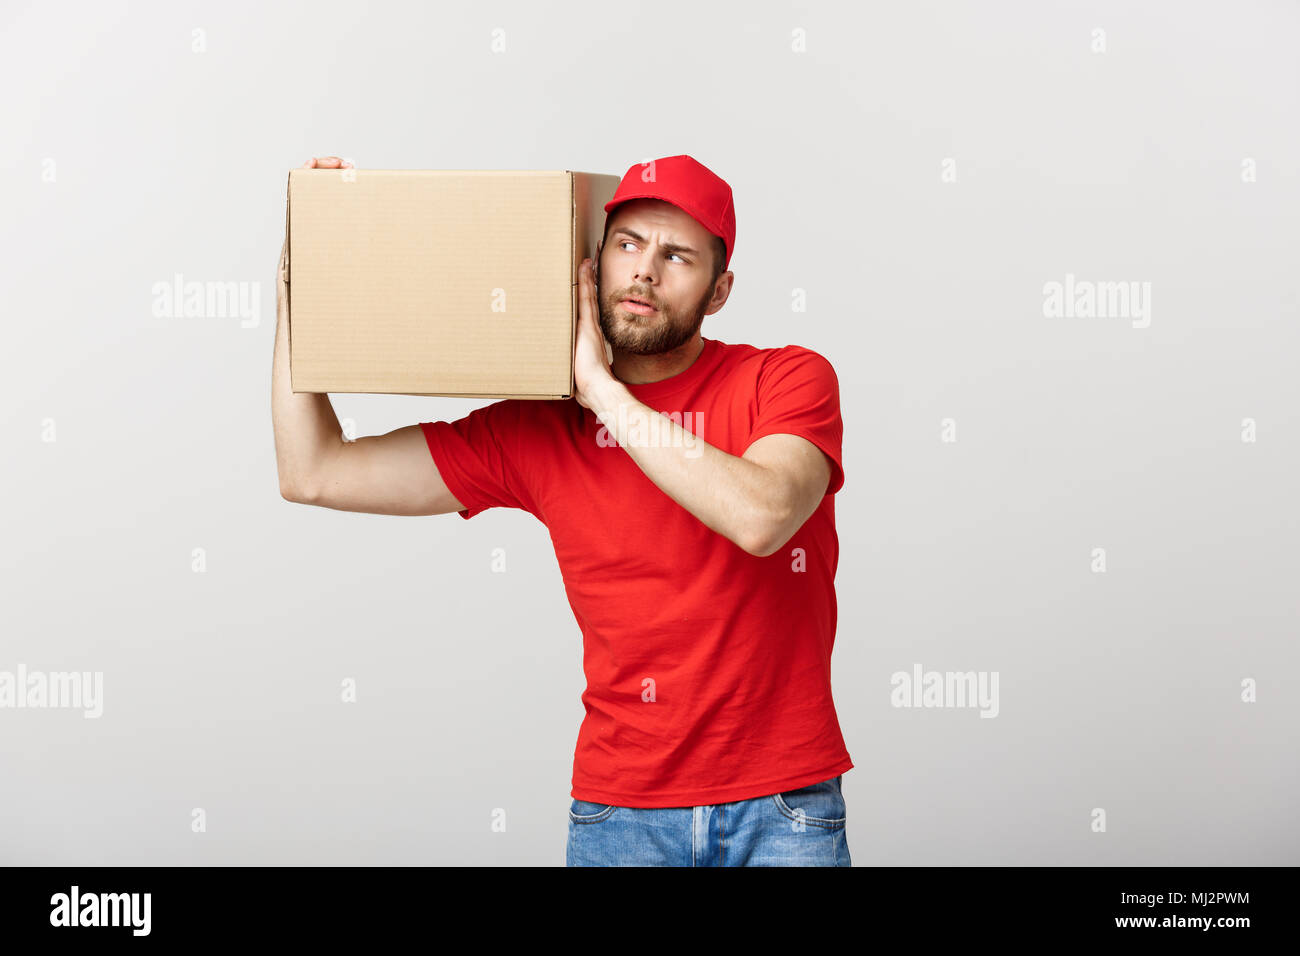 Delivery Concept Portrait Of Curious Caucasian Handsome Delivery Man Listen Inside A Box